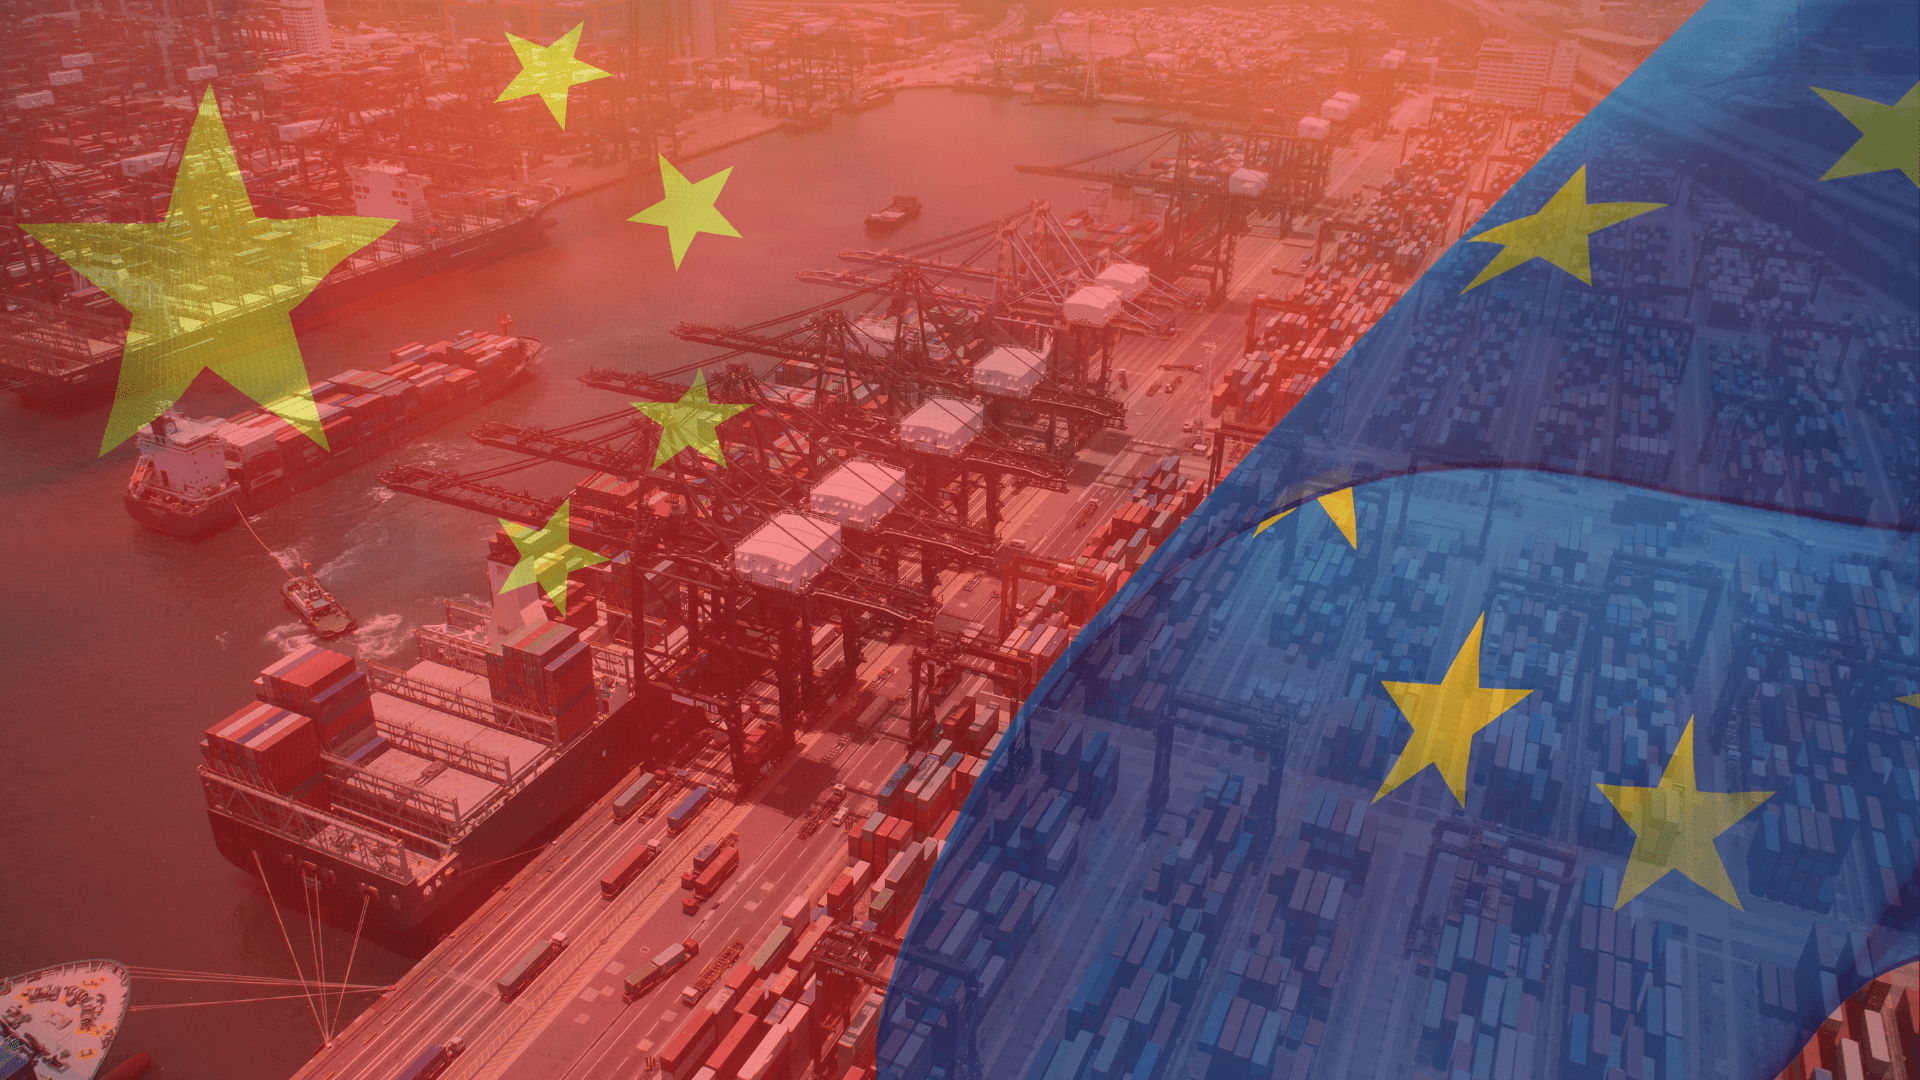 An image of the EU & China flag with a supply chain image.